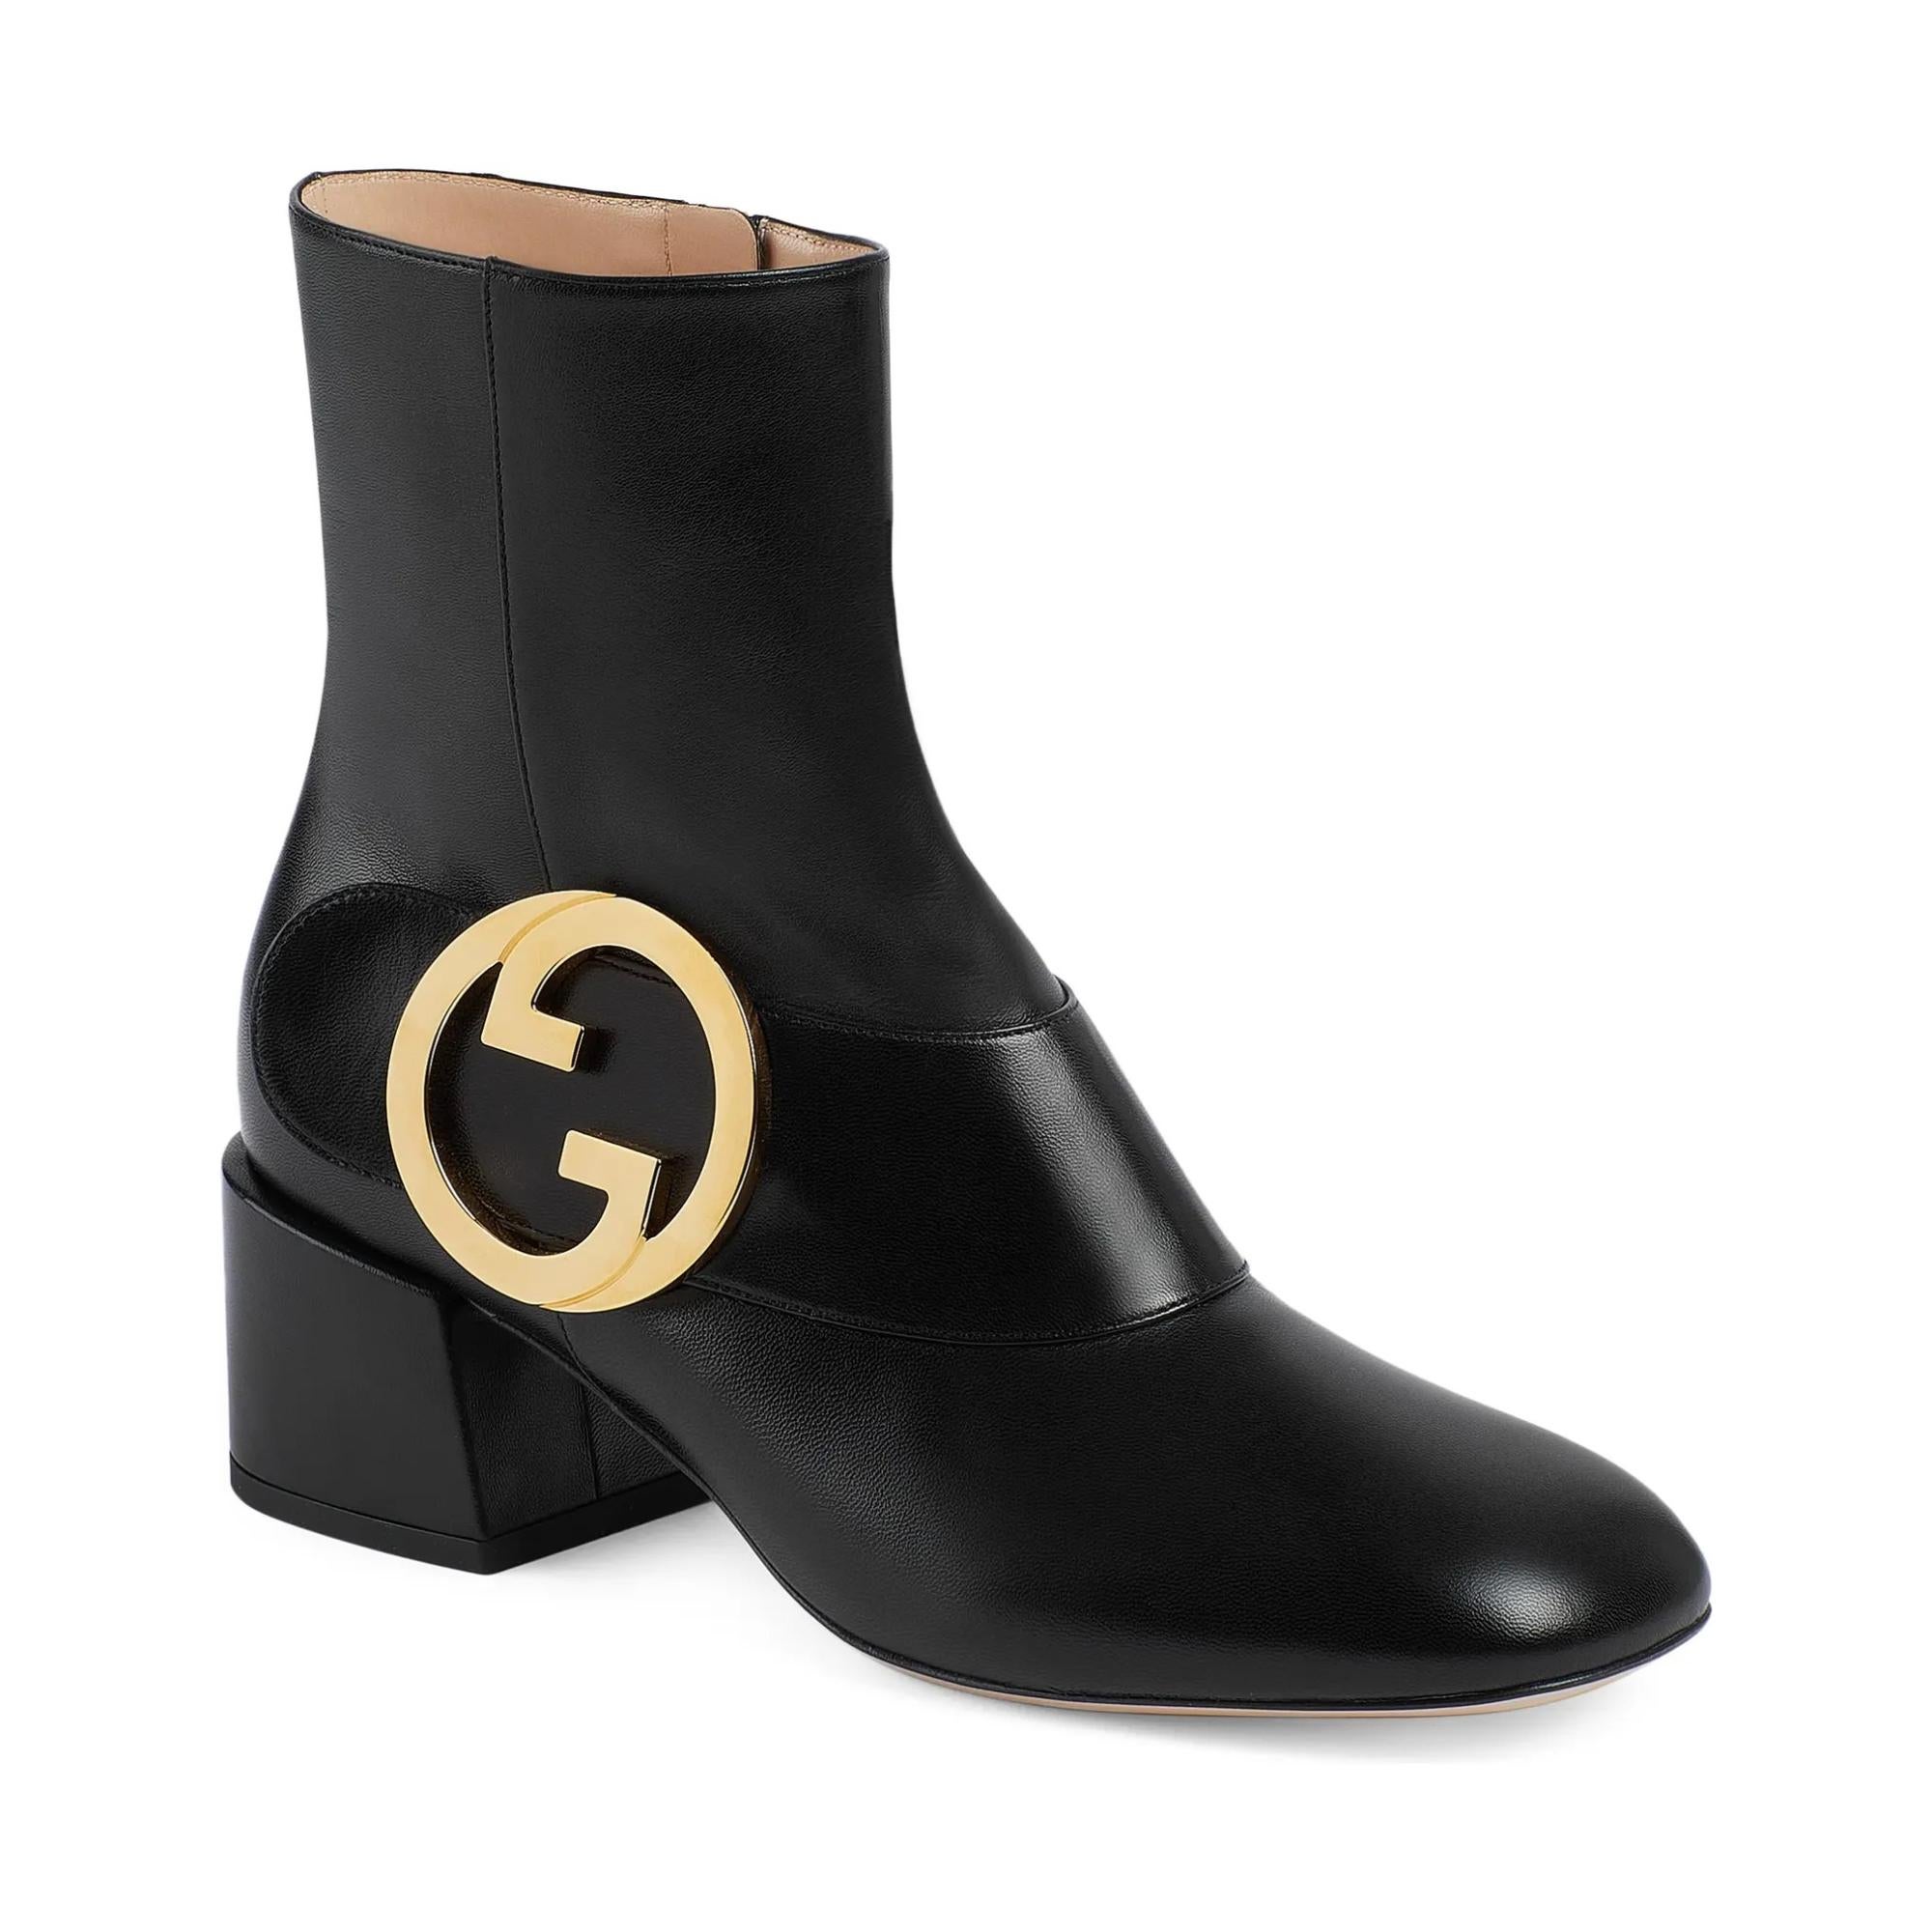 The design for this boot was inspired from 1970's archive pieces. The boots feature the vintage monogram round interlocking g detail in gold tone hardware. The boots are constructed of black leather with zip closure. The vintage Gucci logo detail